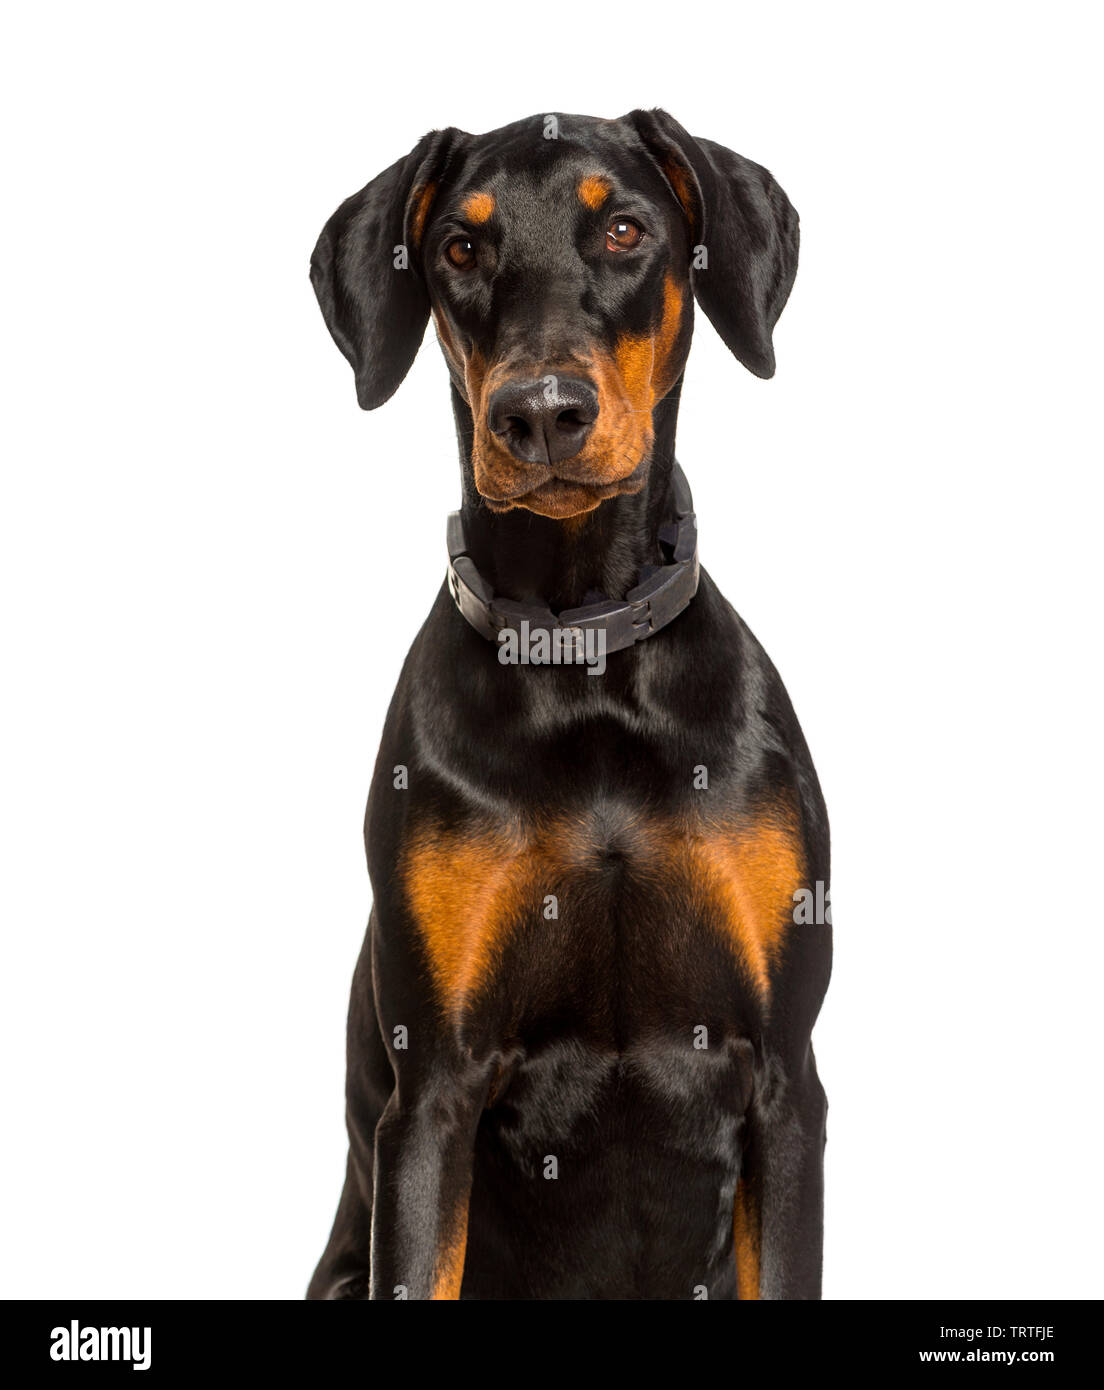 Doberman dog looking at camera against white background Stock ...